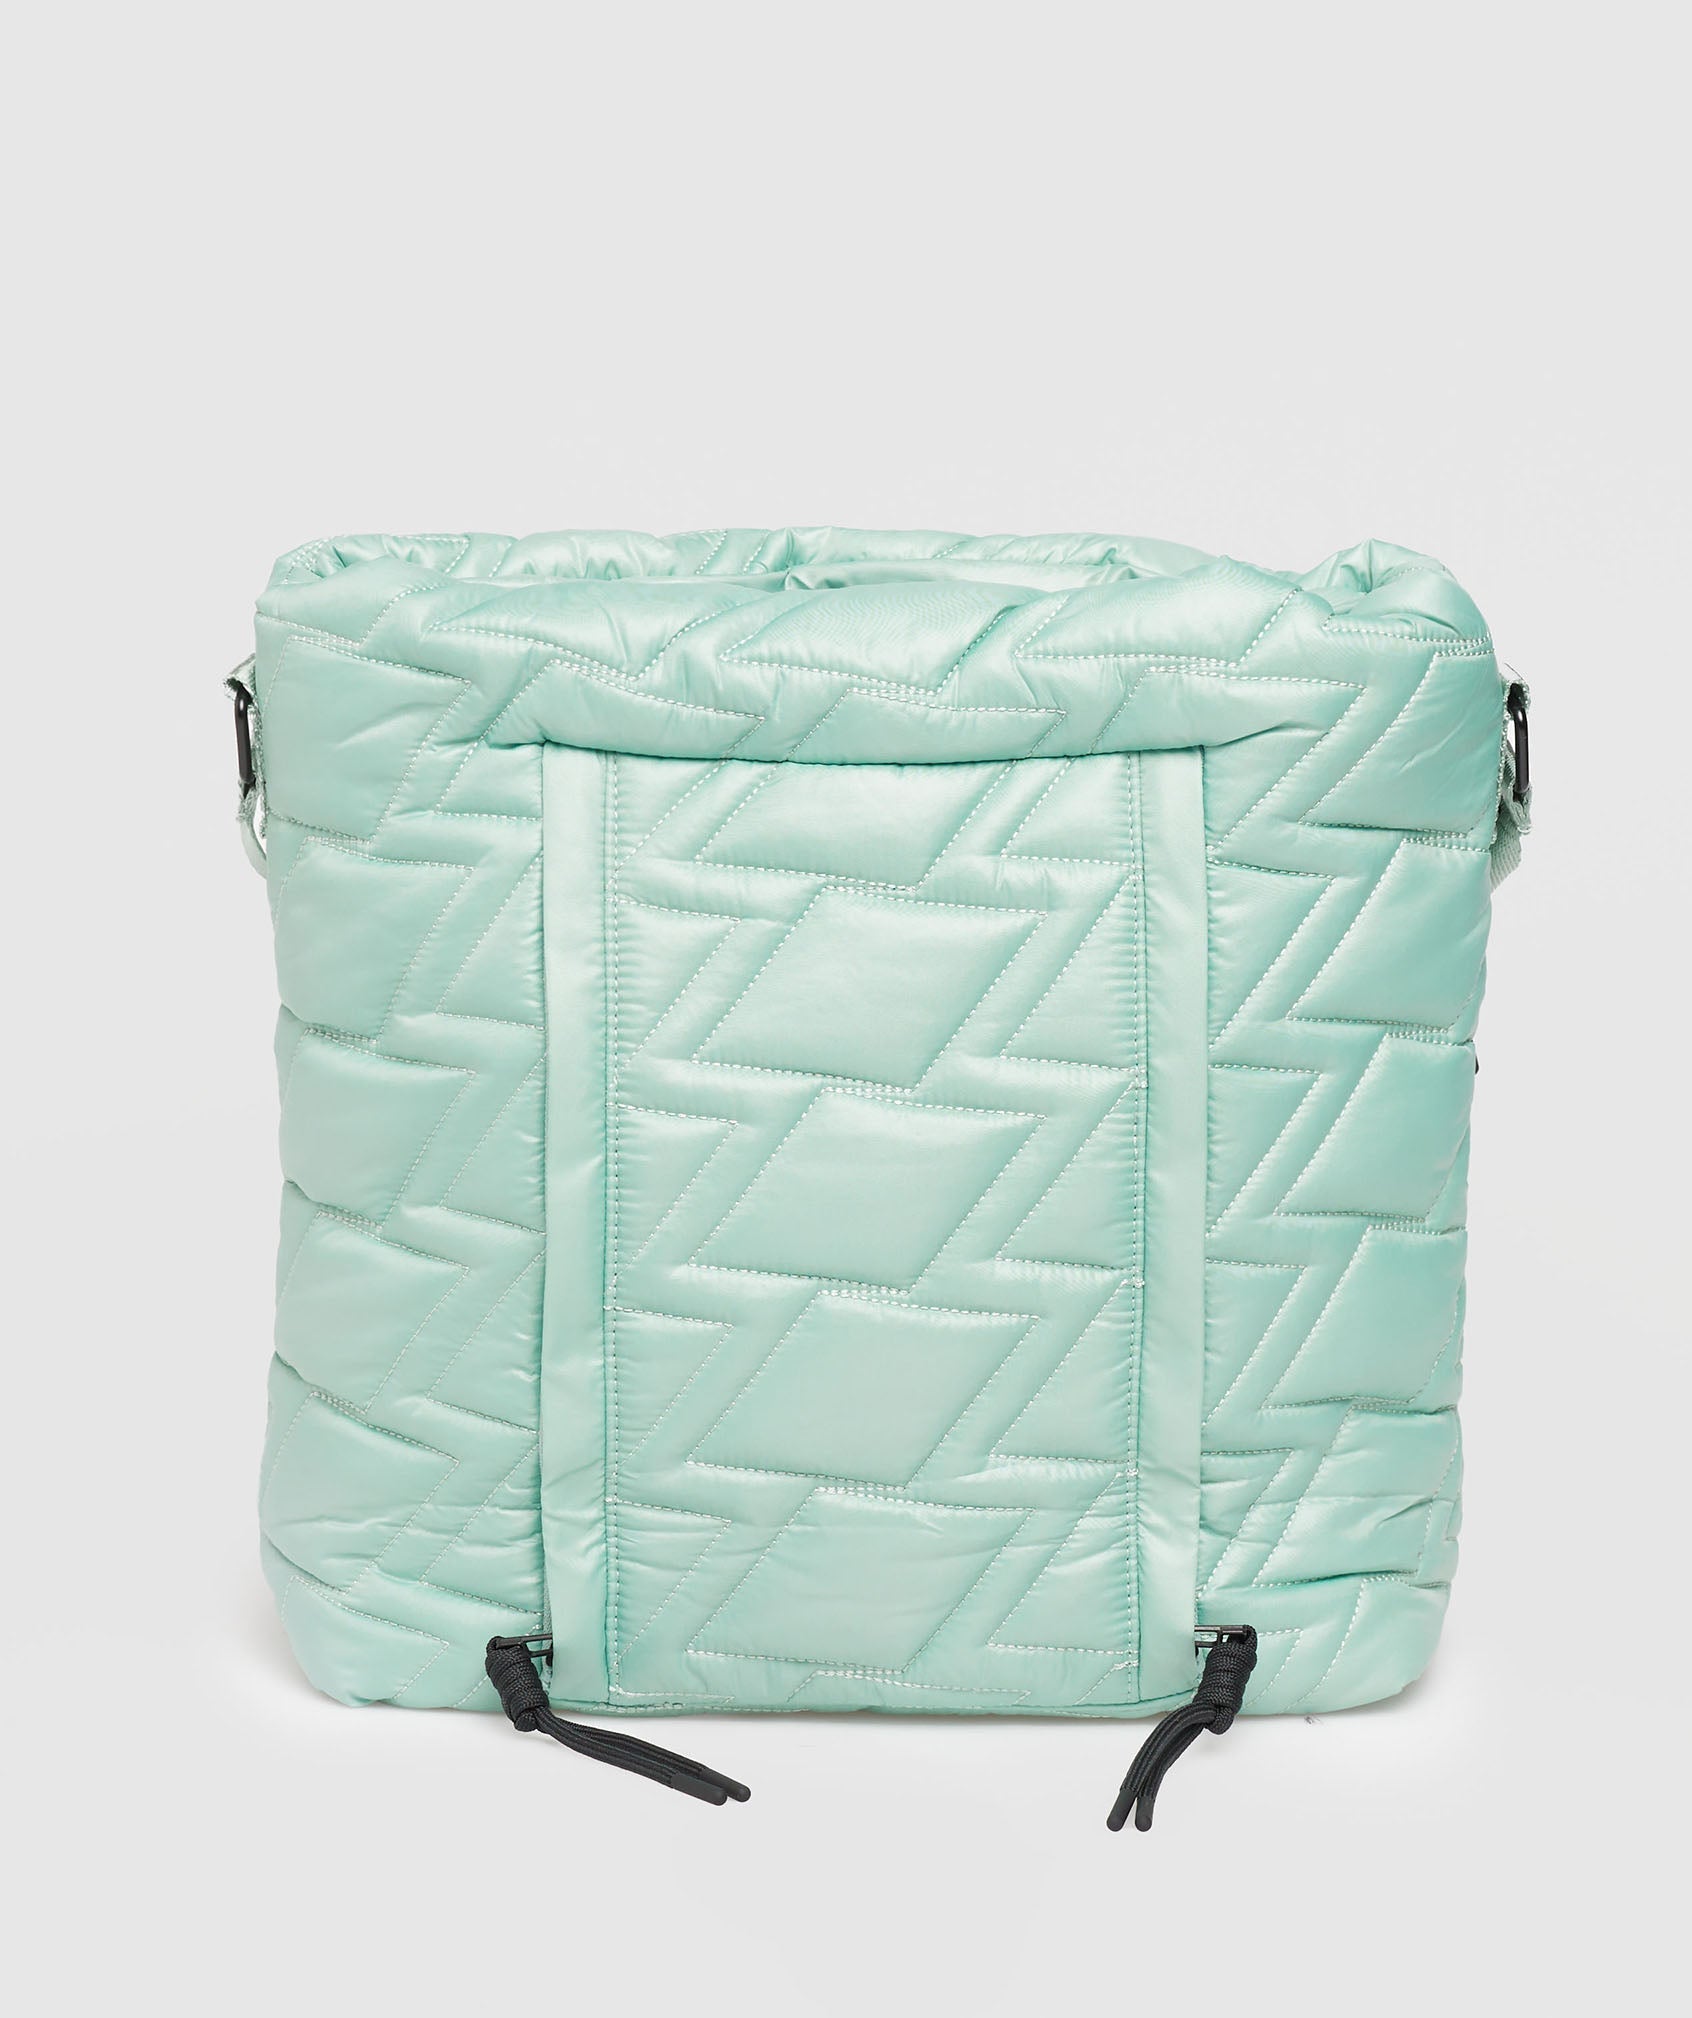 Quilted Yoga Tote in Frost Teal